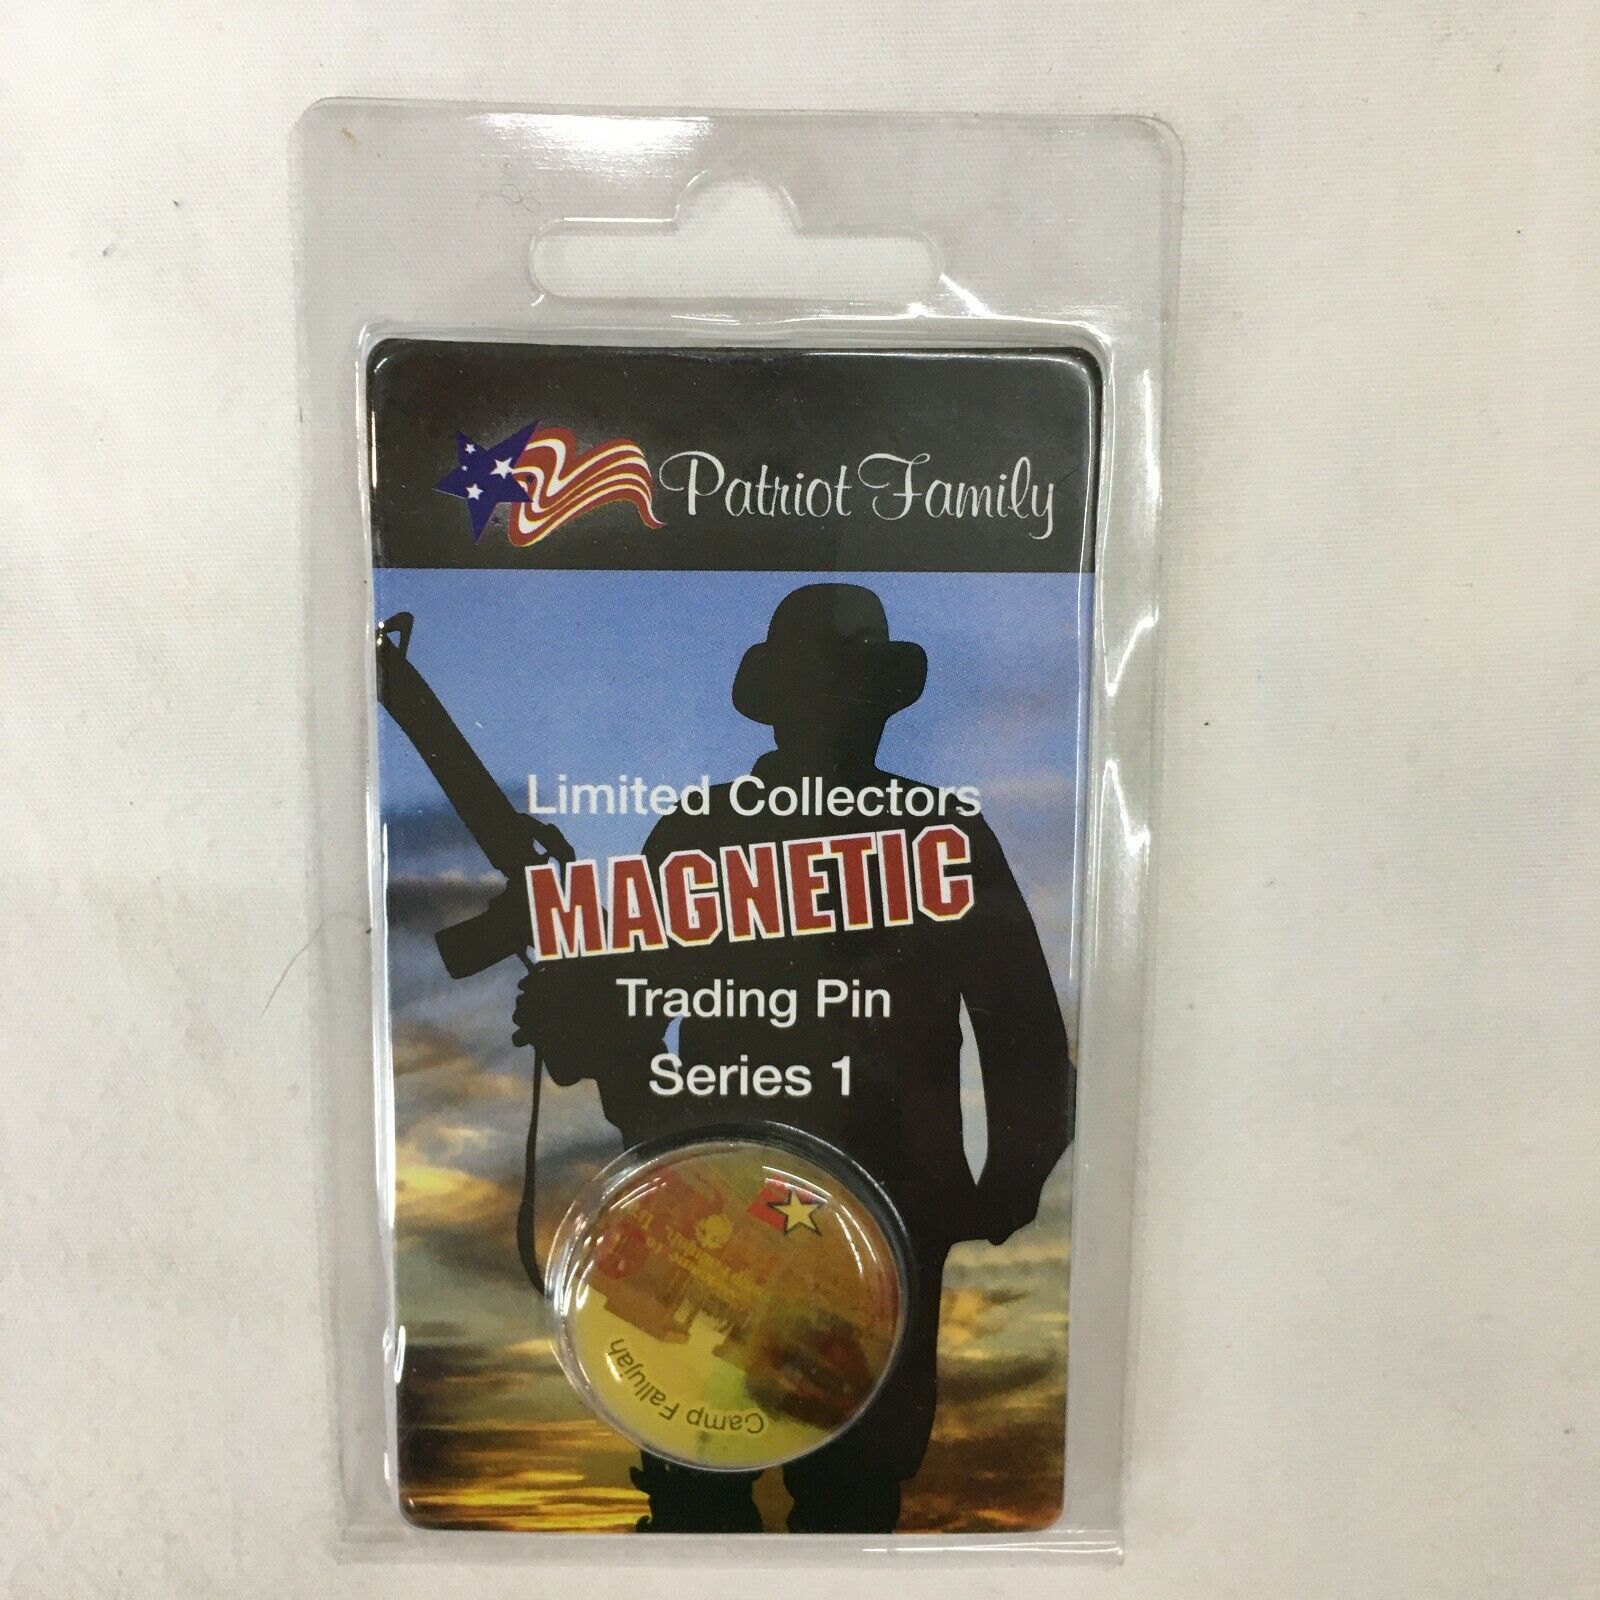 Magnetic Trading Pin, Patriot Family Limited Collectors Iraq, 3 Pin Lot Series 1 Без бренда - фотография #4